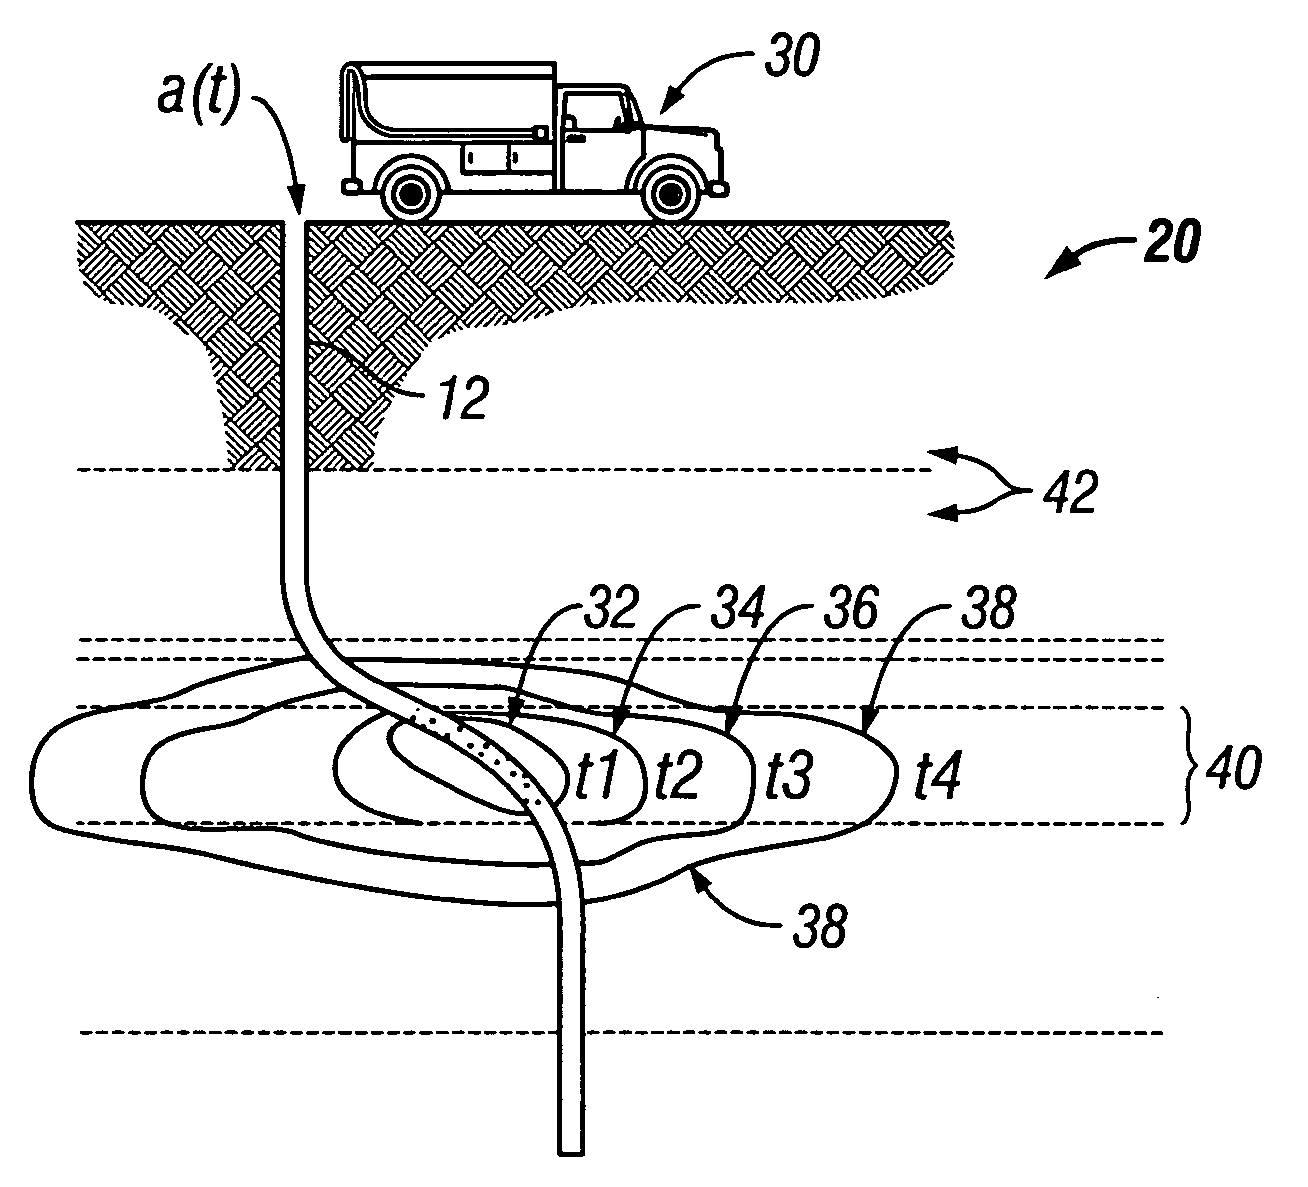 Method and apparatus and program storage device for front tracking in hydraulic fracturing simulators